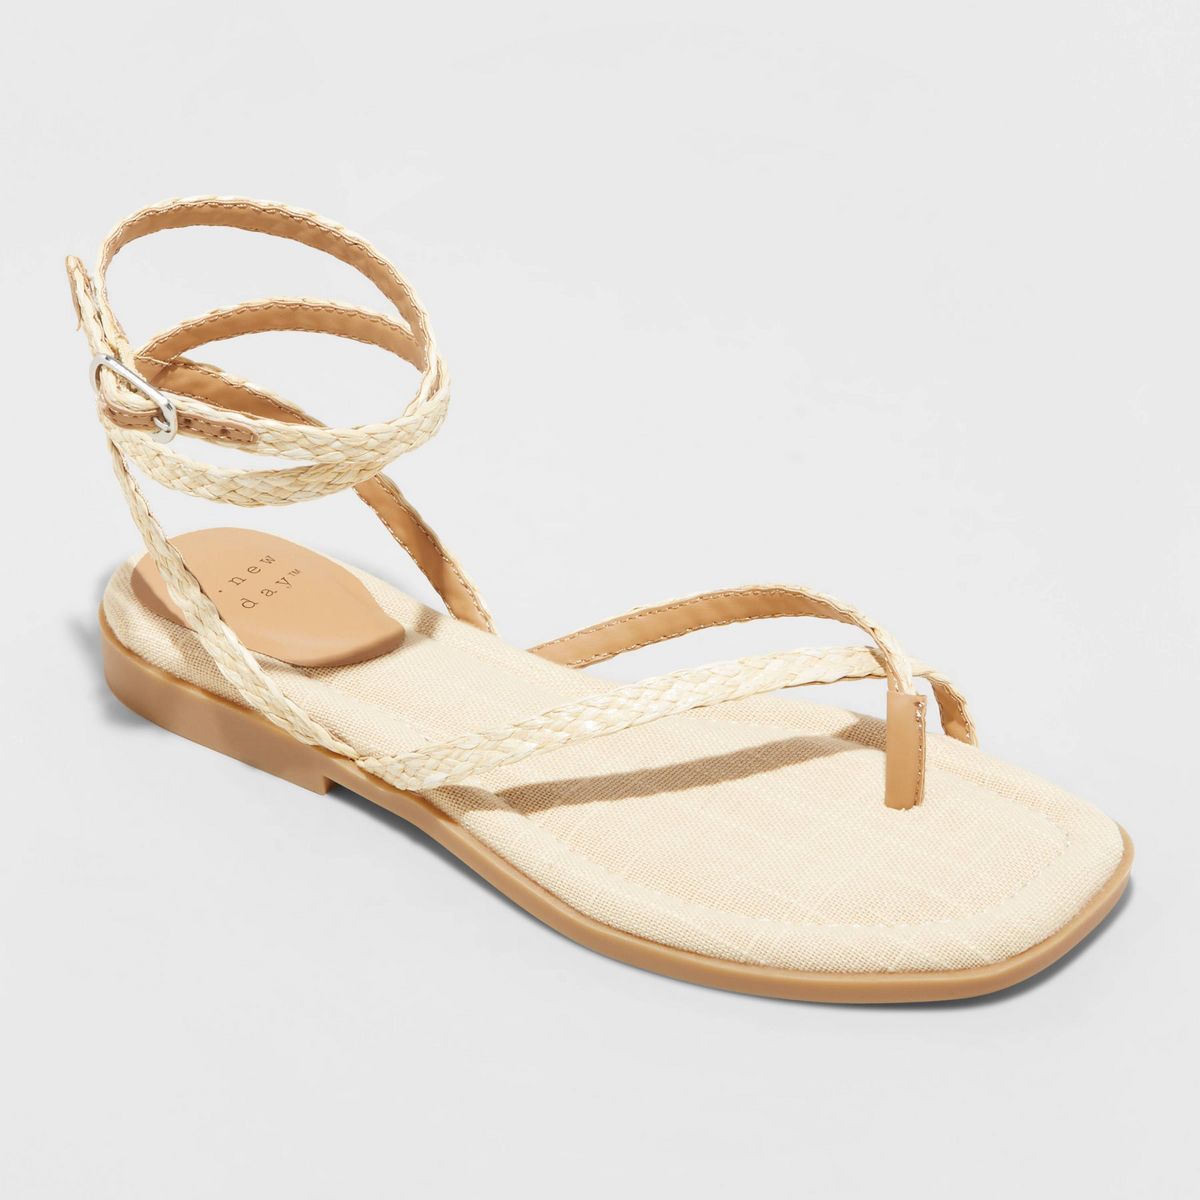 Women's Luisa Ankle Strap Thong Sandals - A New Day™ Beige 7.5 | Target